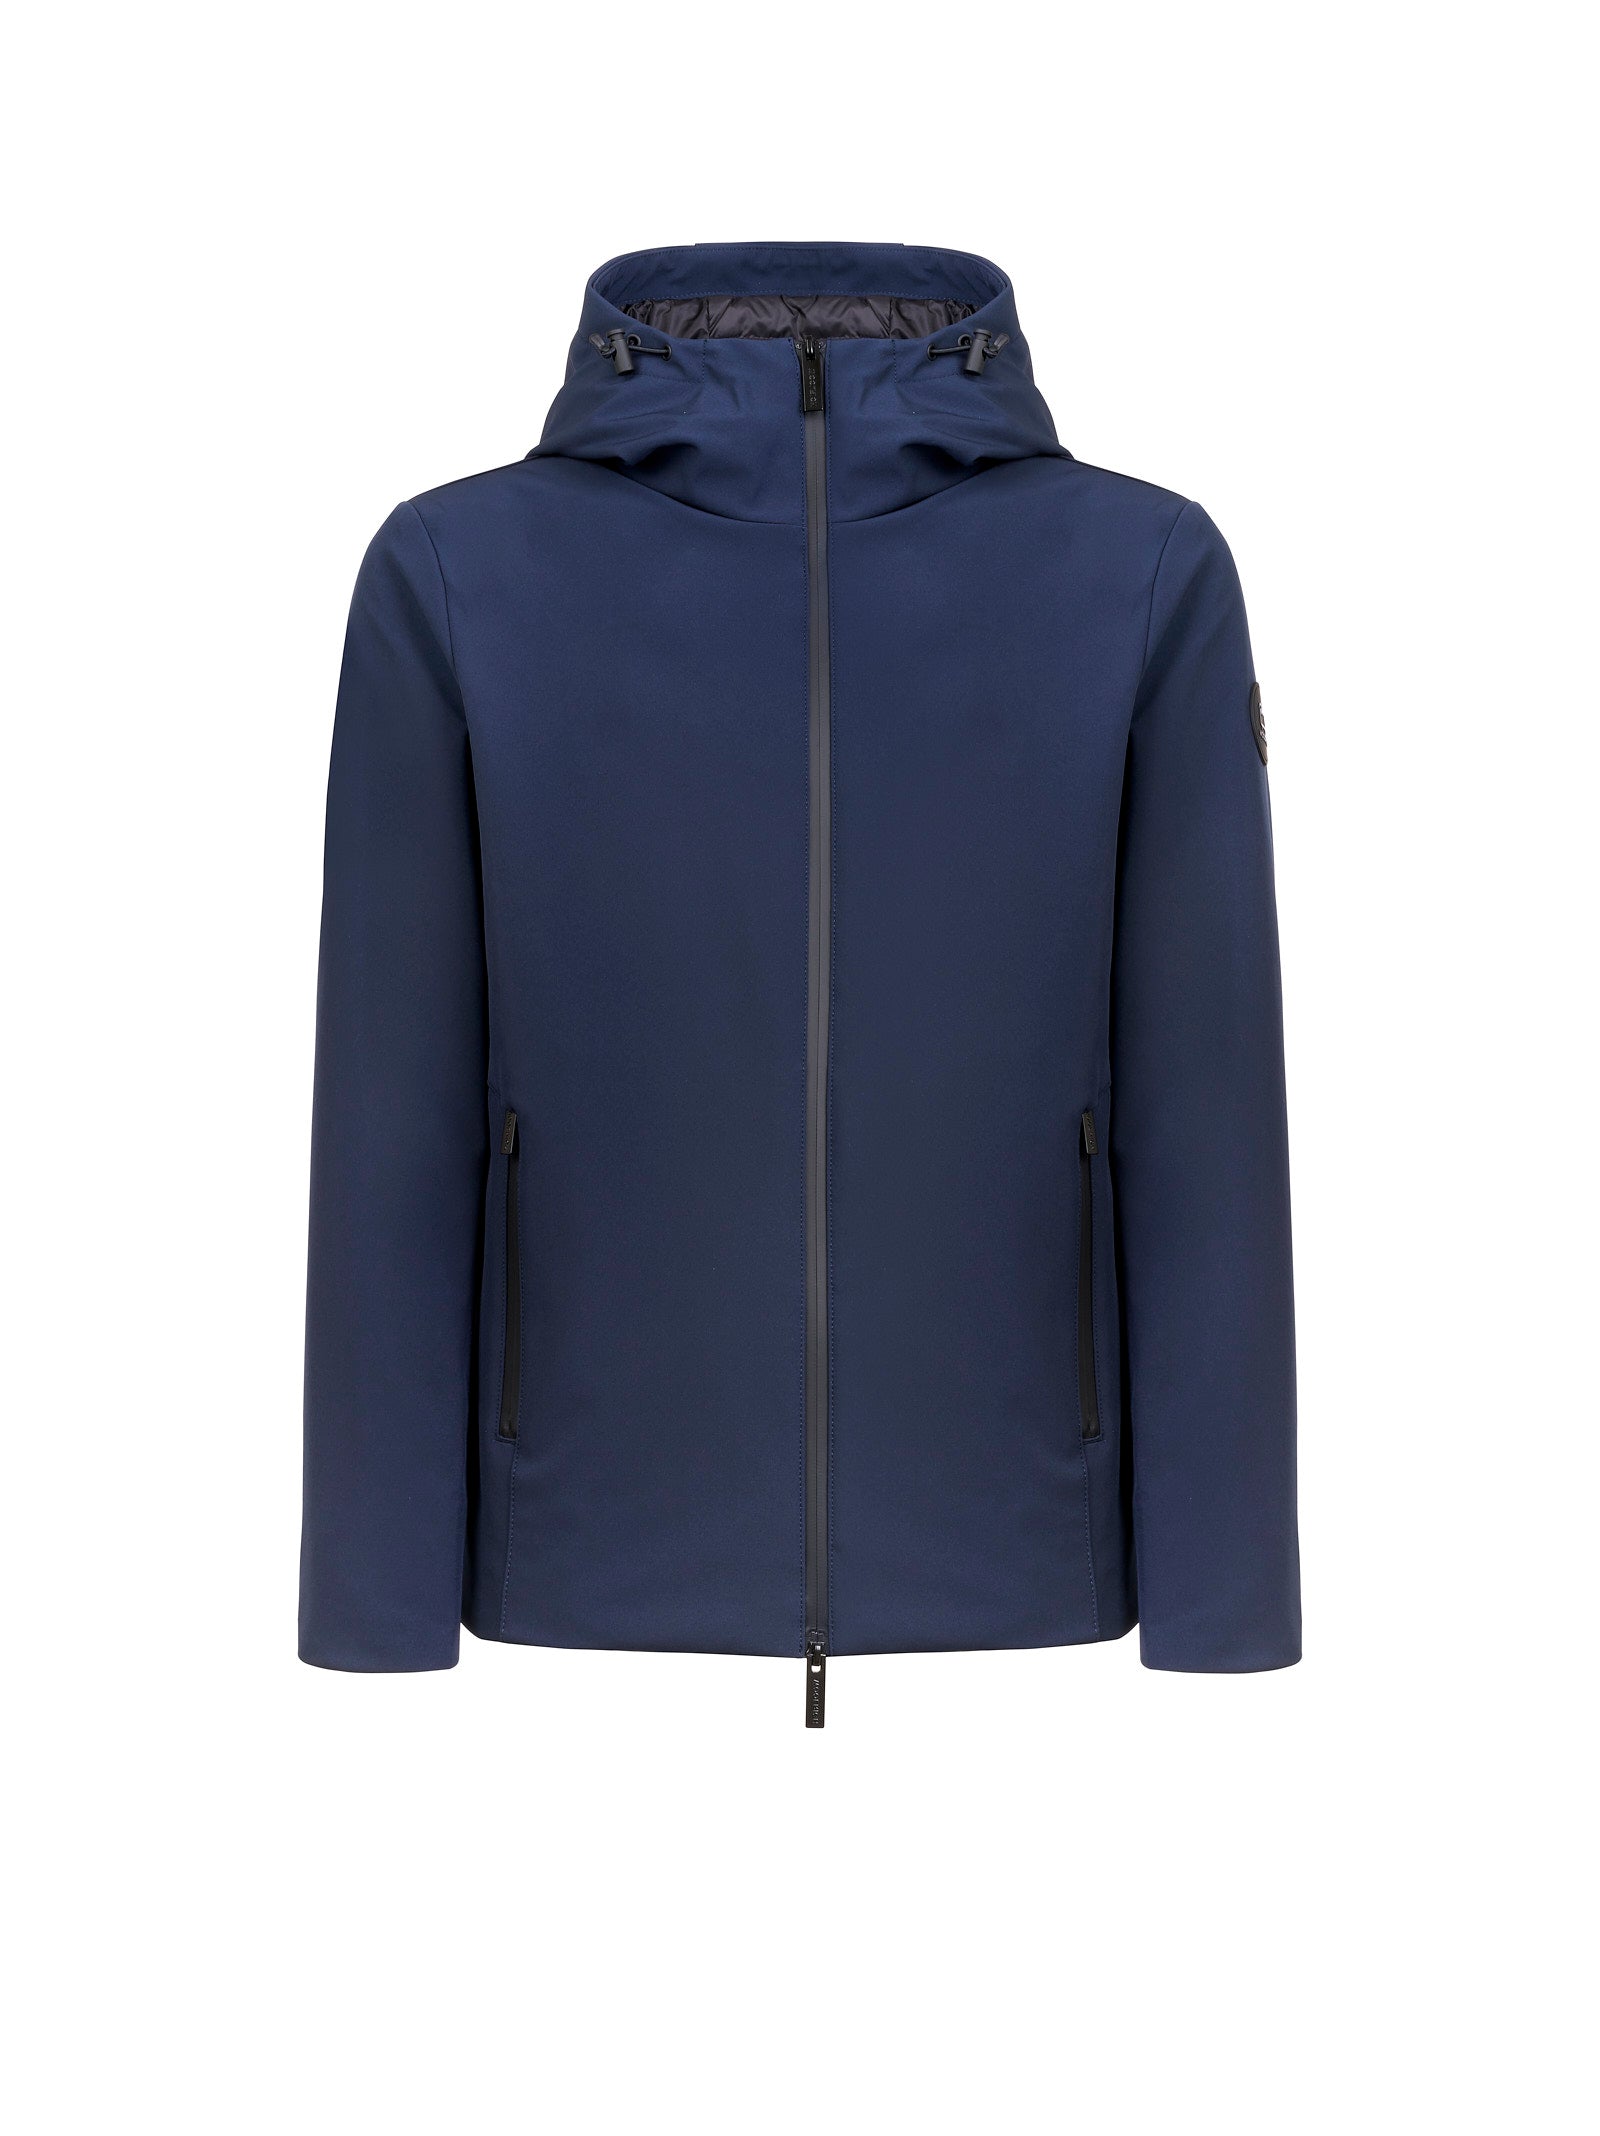 Giubbotto WOOLRICH Pacific soft shell jacket
Blue